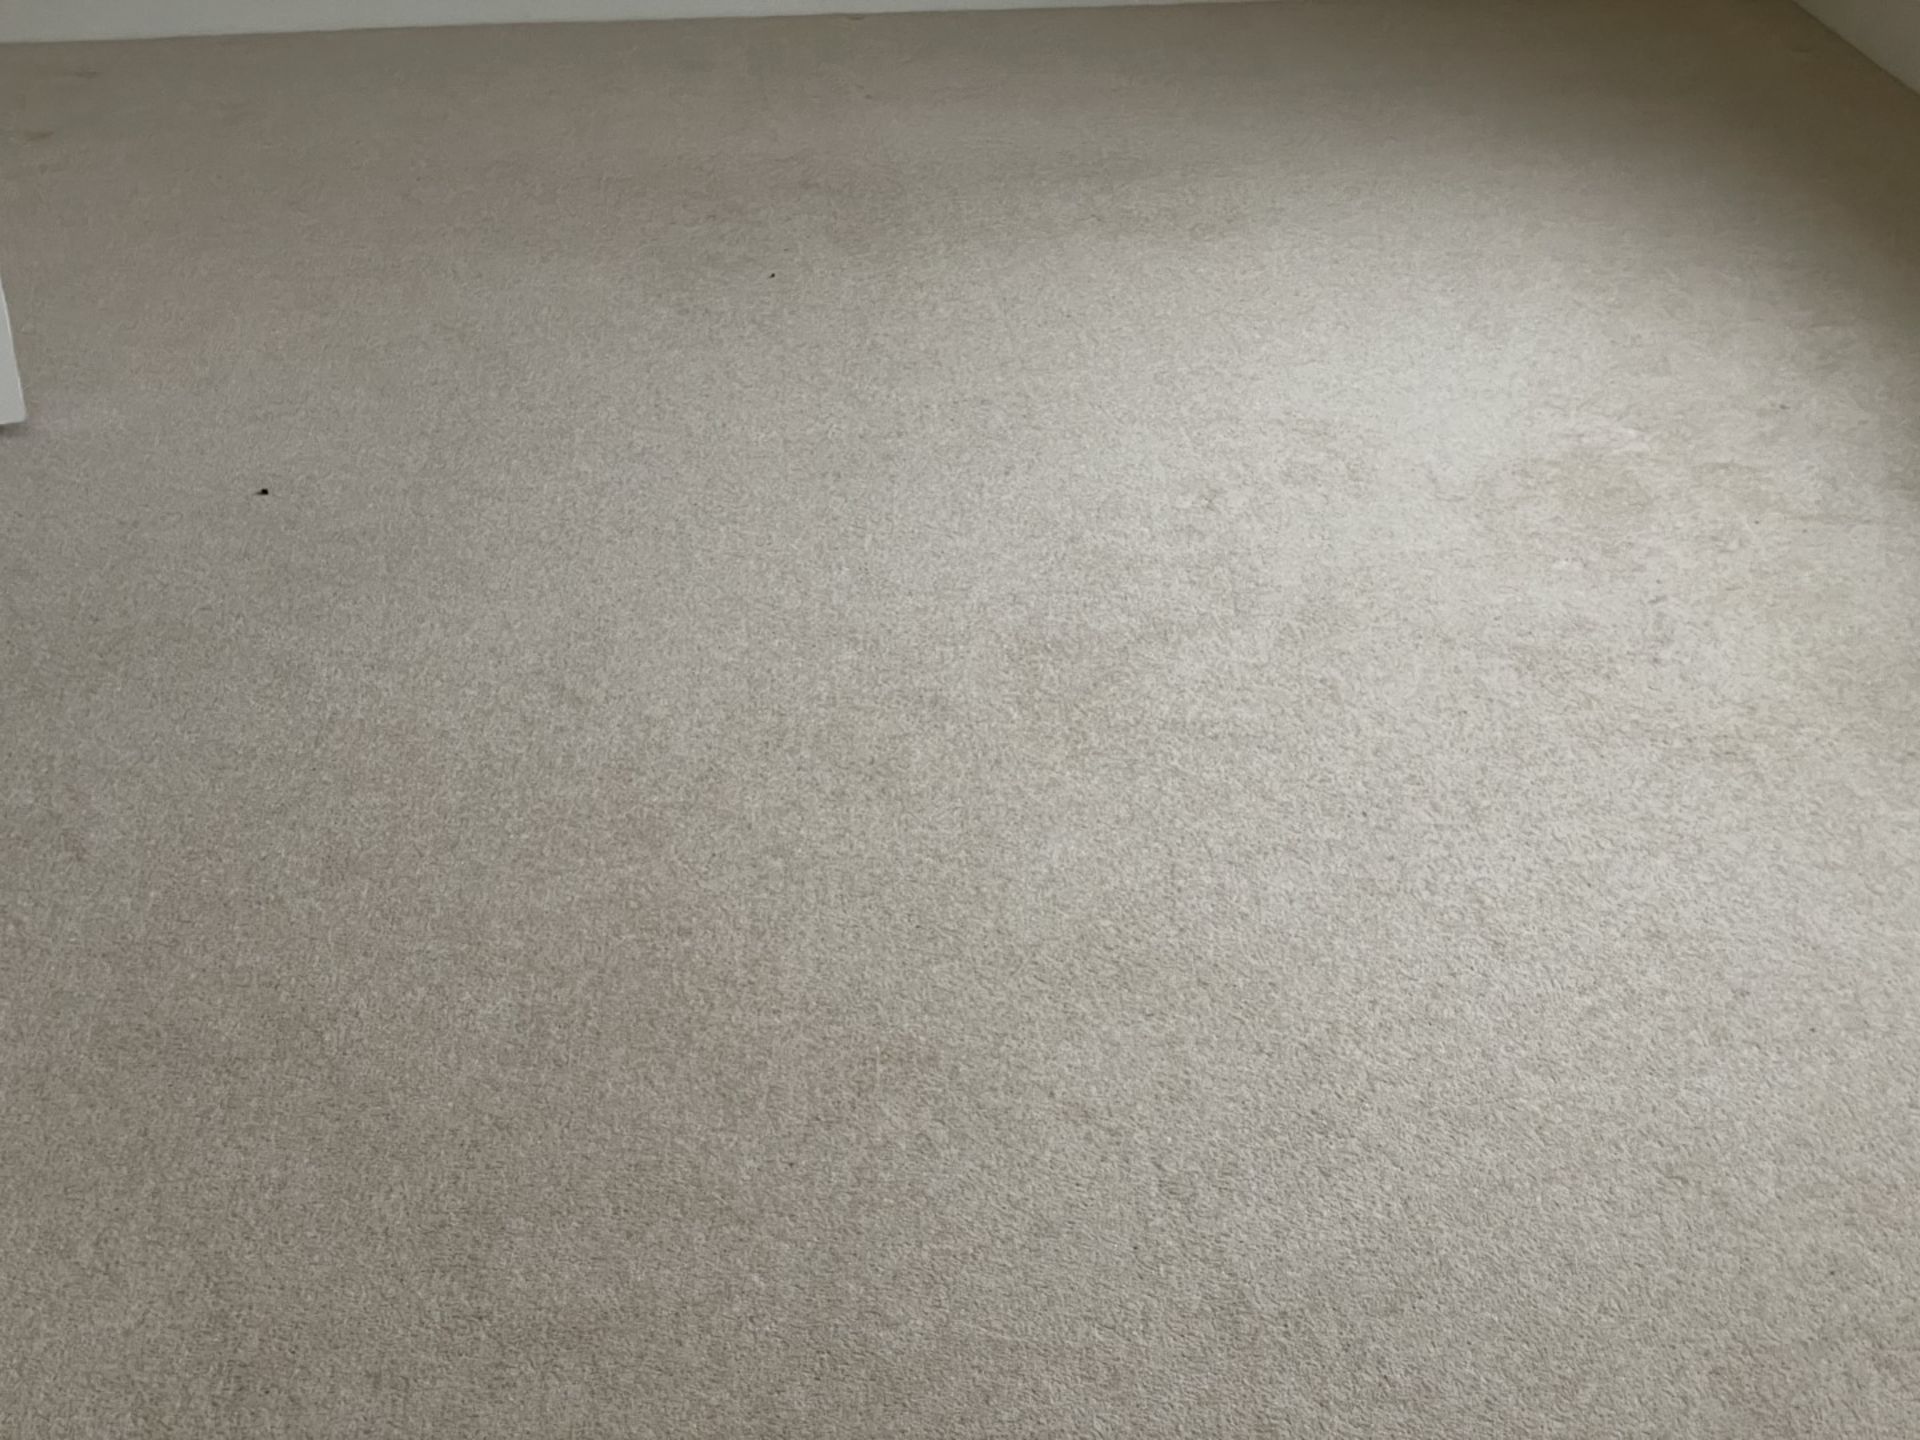 1 x Luxury Wool Back Bedroom Carpet in a Neutral Tone with Premium Underlay - Image 8 of 16